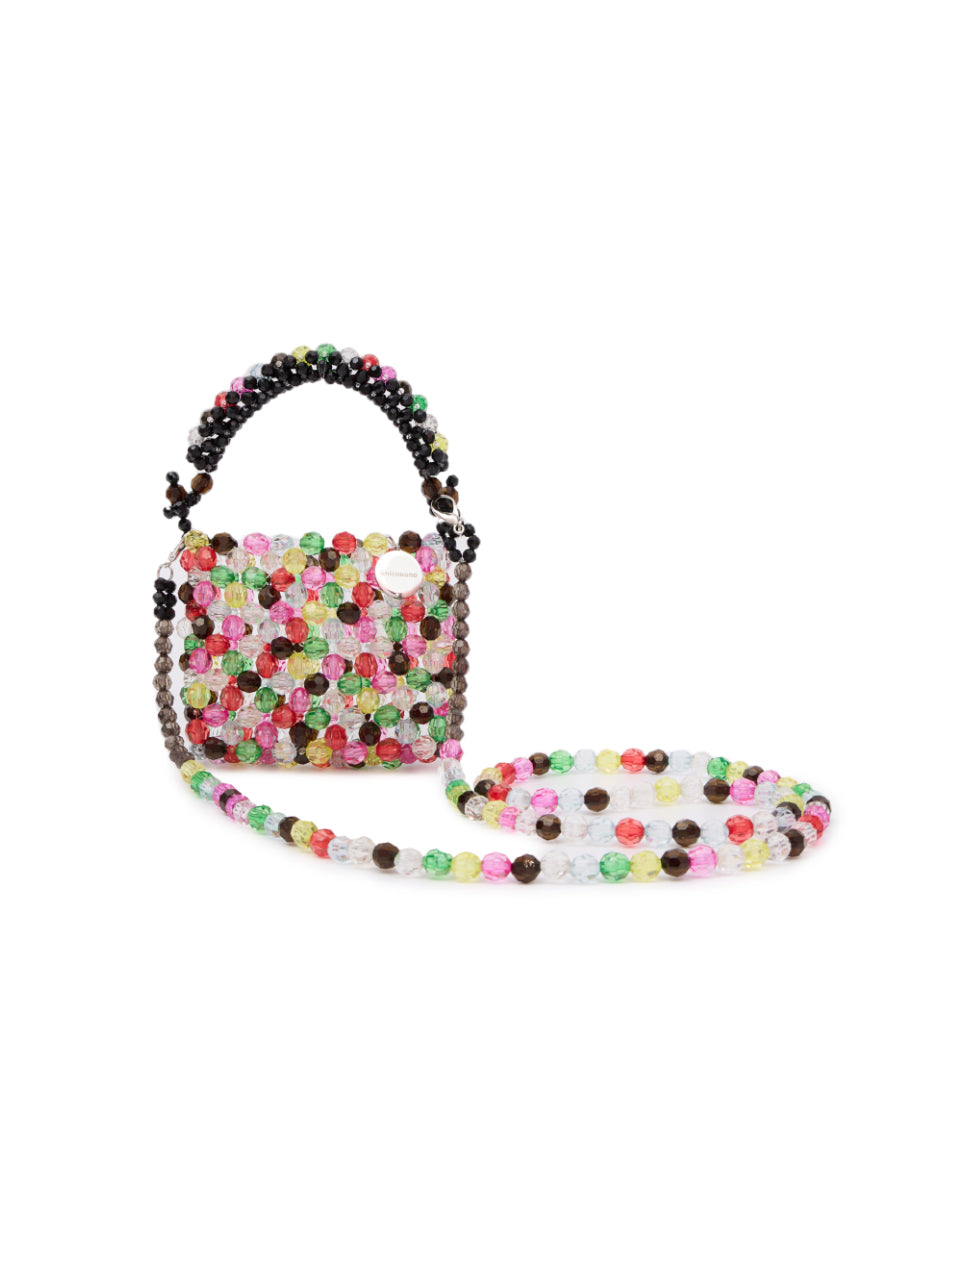 A-1598 Beads Mini Cross Bag <BR>*HAND CRAFTED*